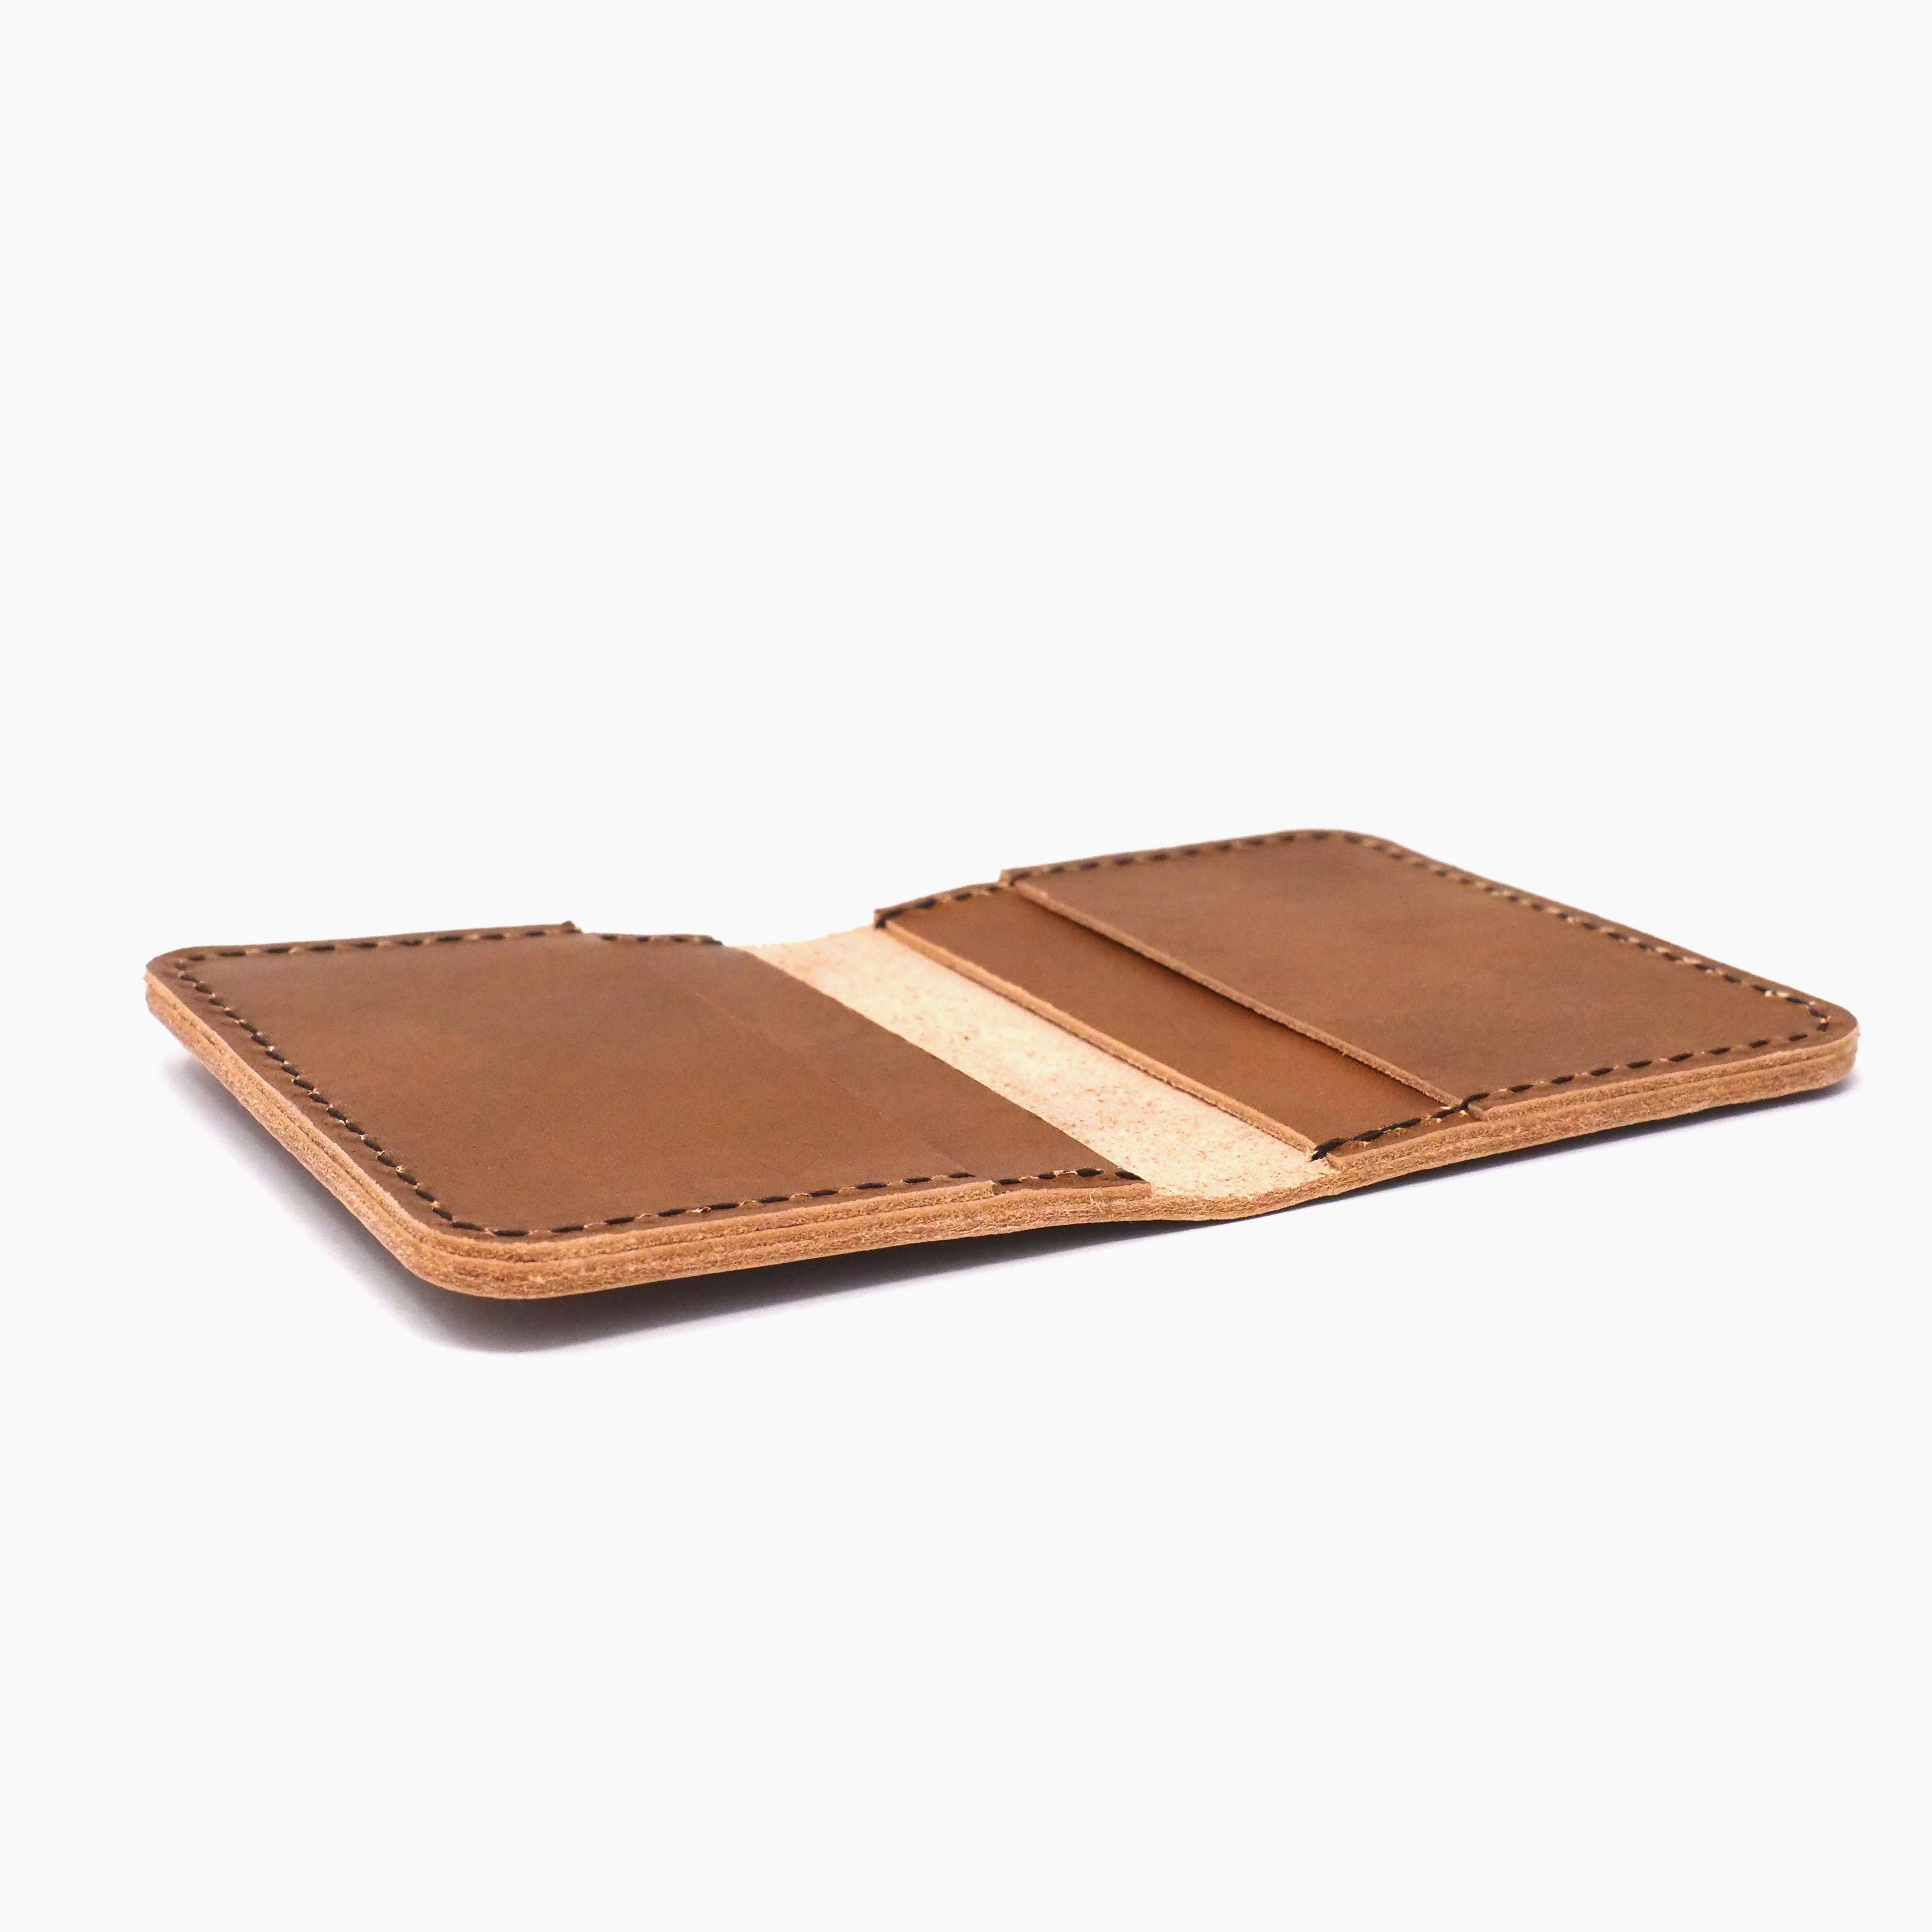 Double Card Wallet